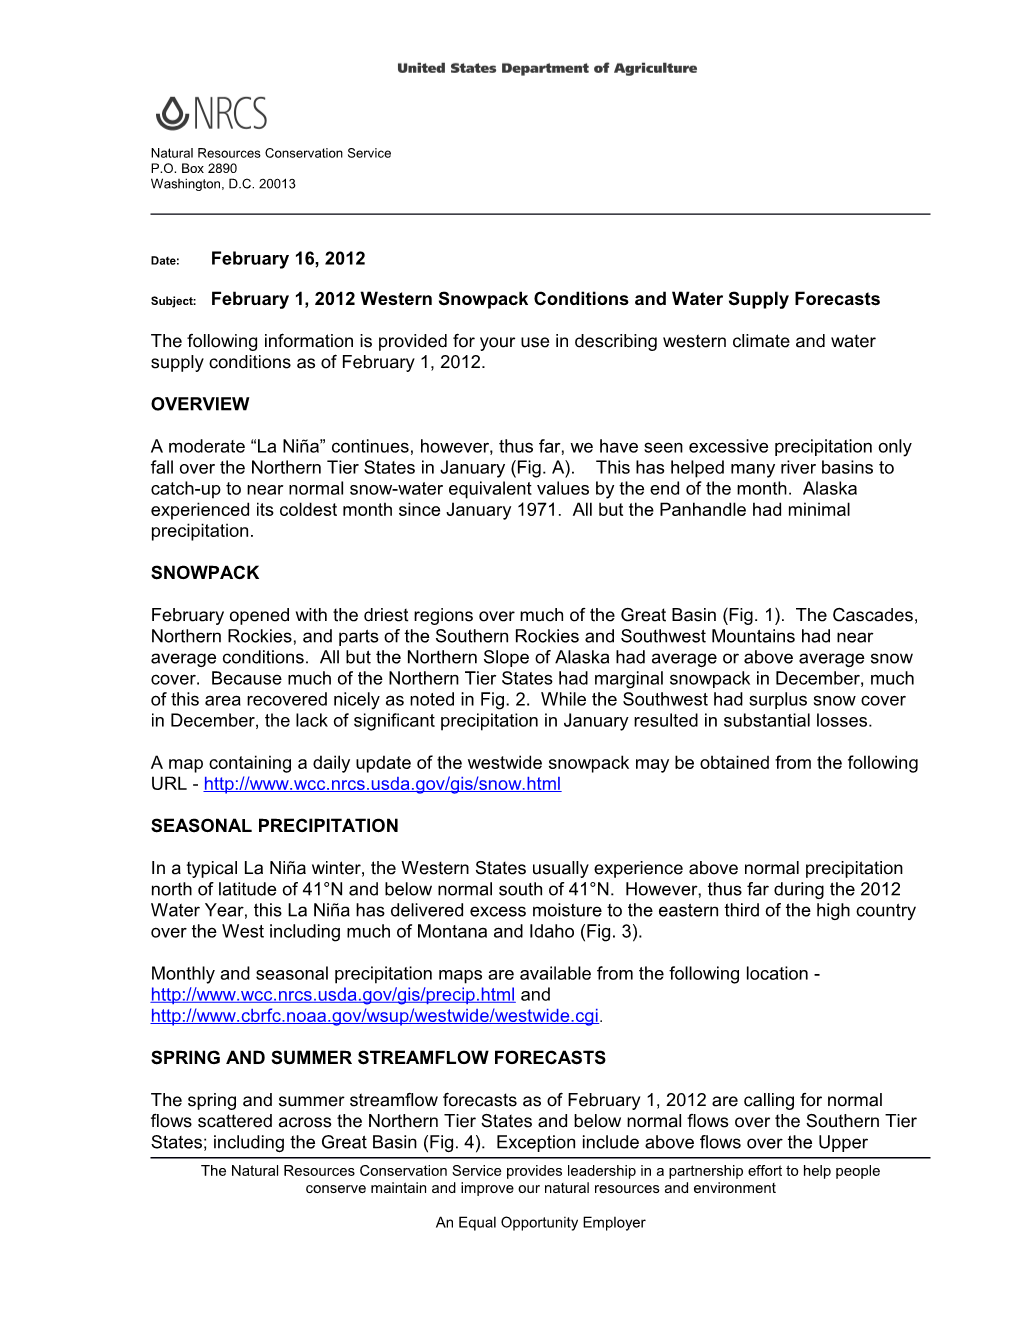 Subject:February 1, 2012Western Snowpack Conditions and Water Supply Forecasts